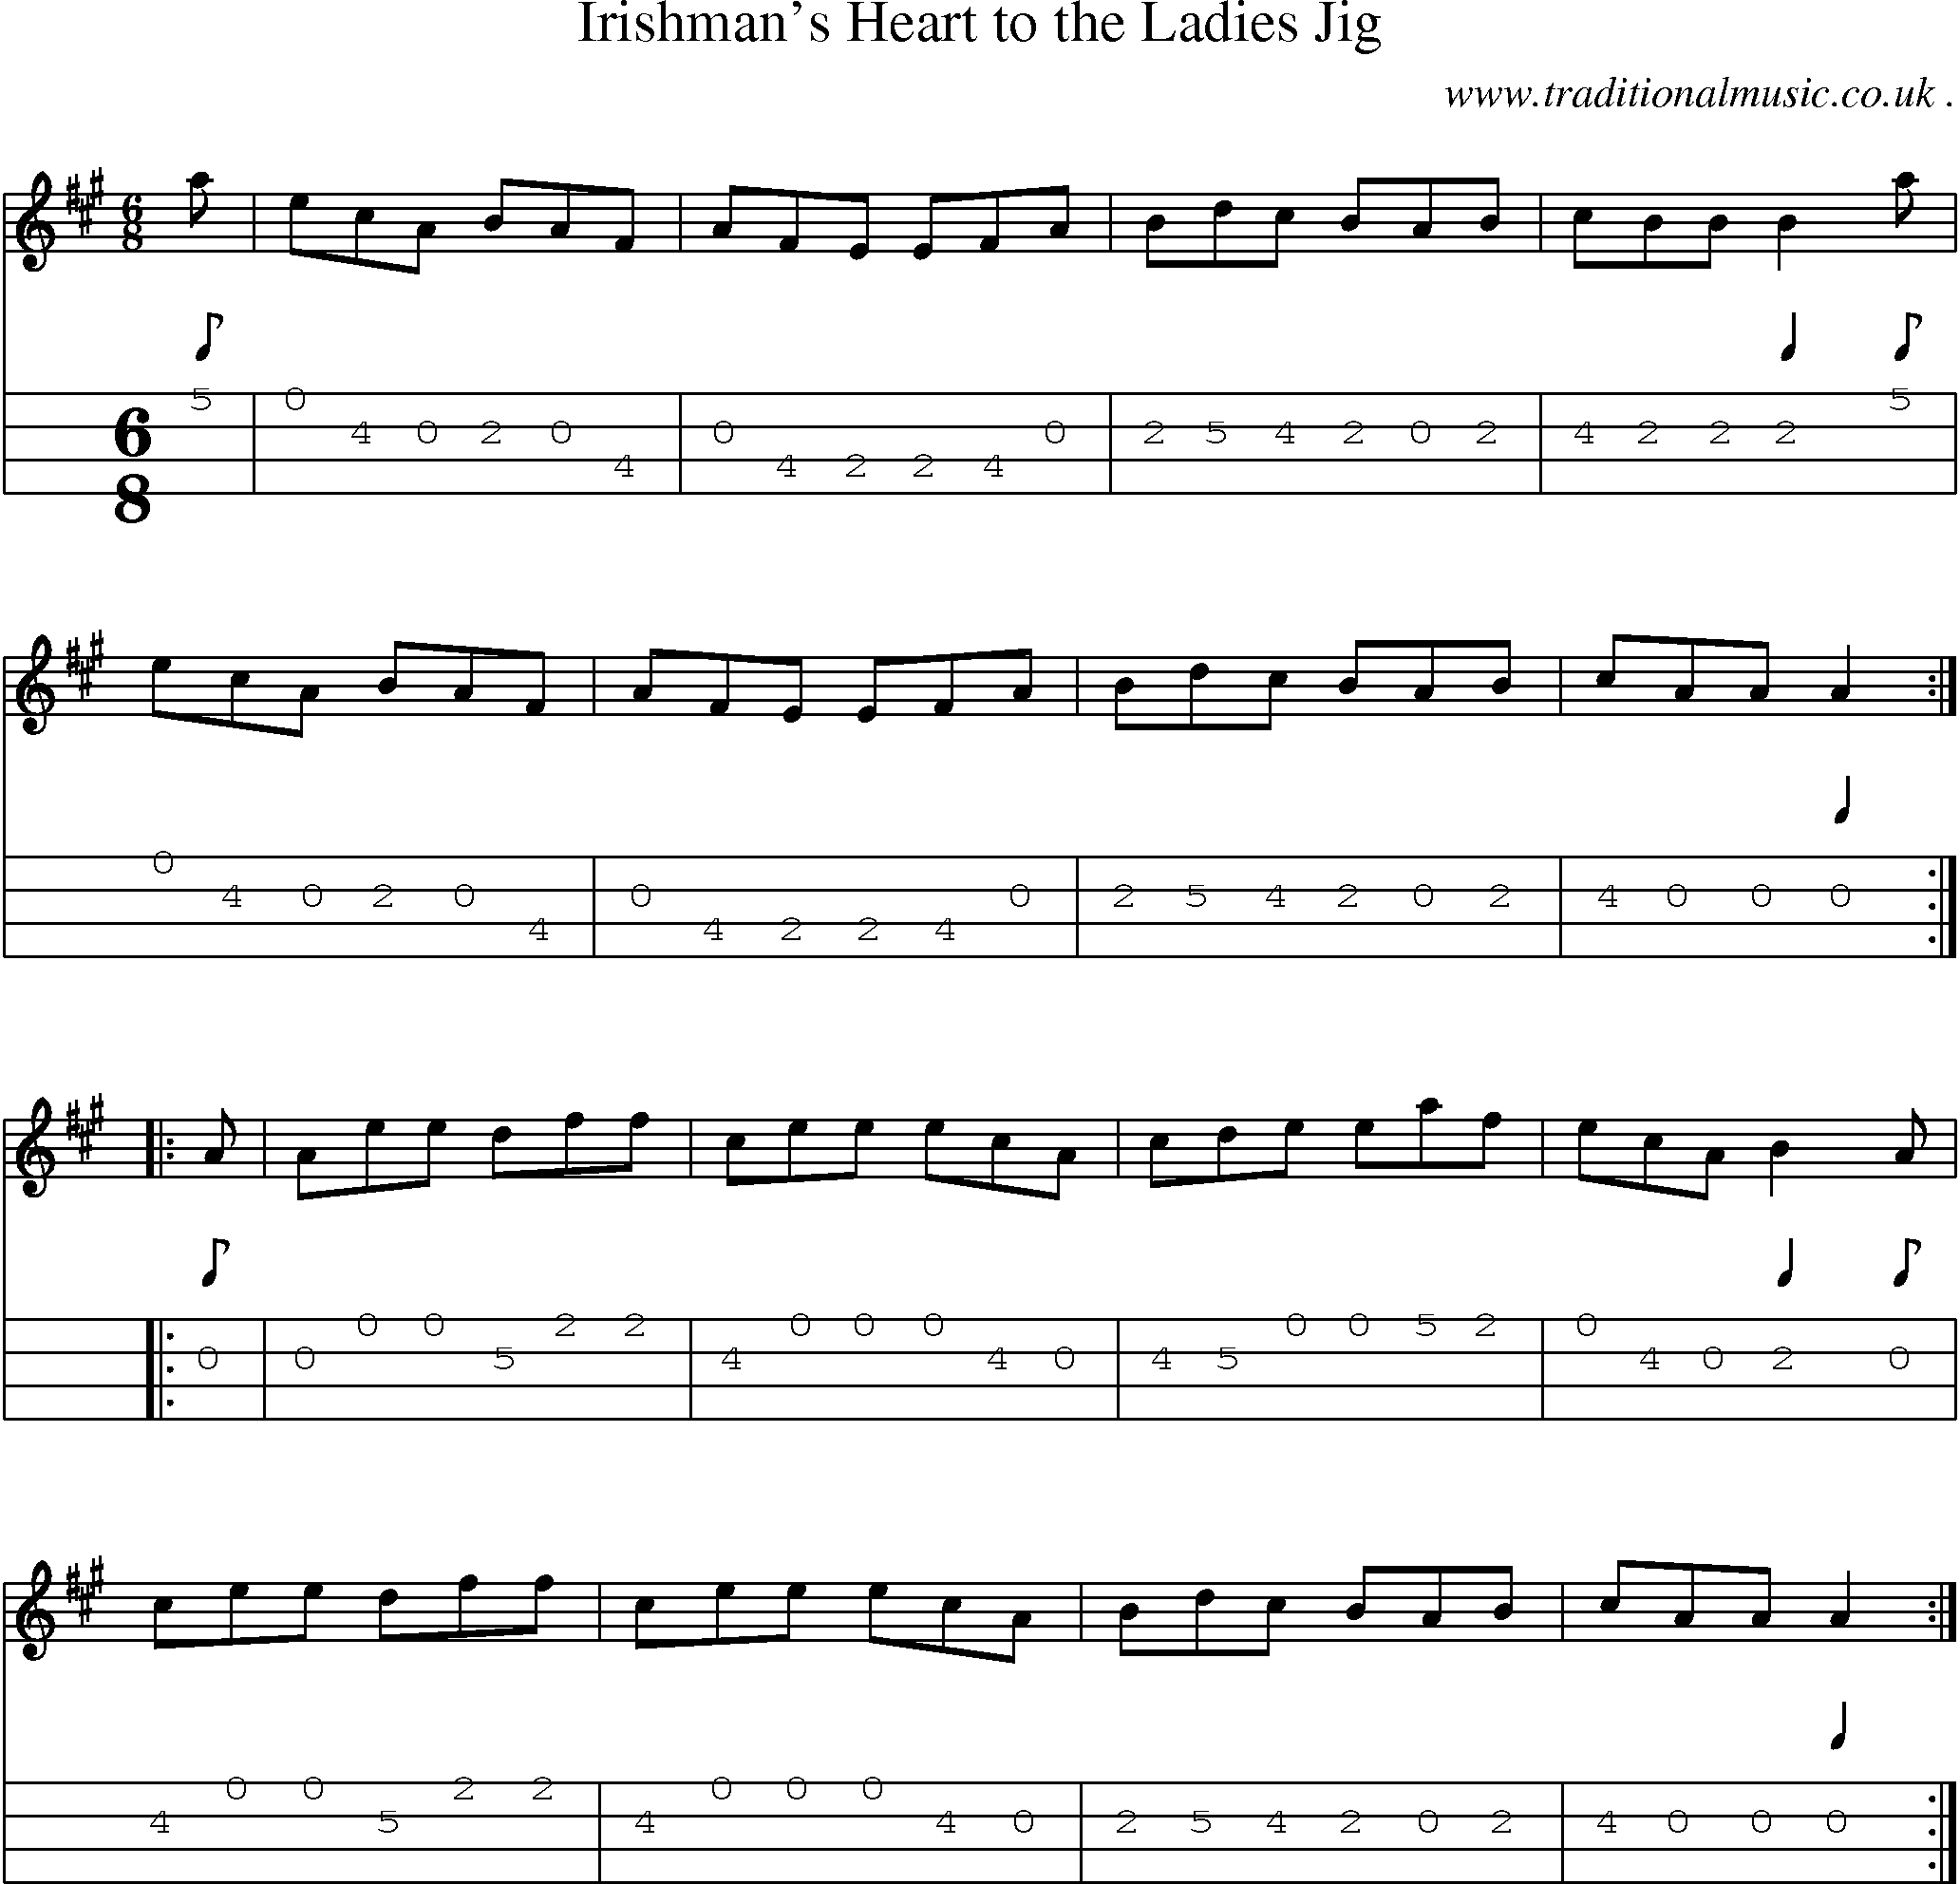 Sheet-Music and Mandolin Tabs for Irishmans Heart To The Ladies Jig